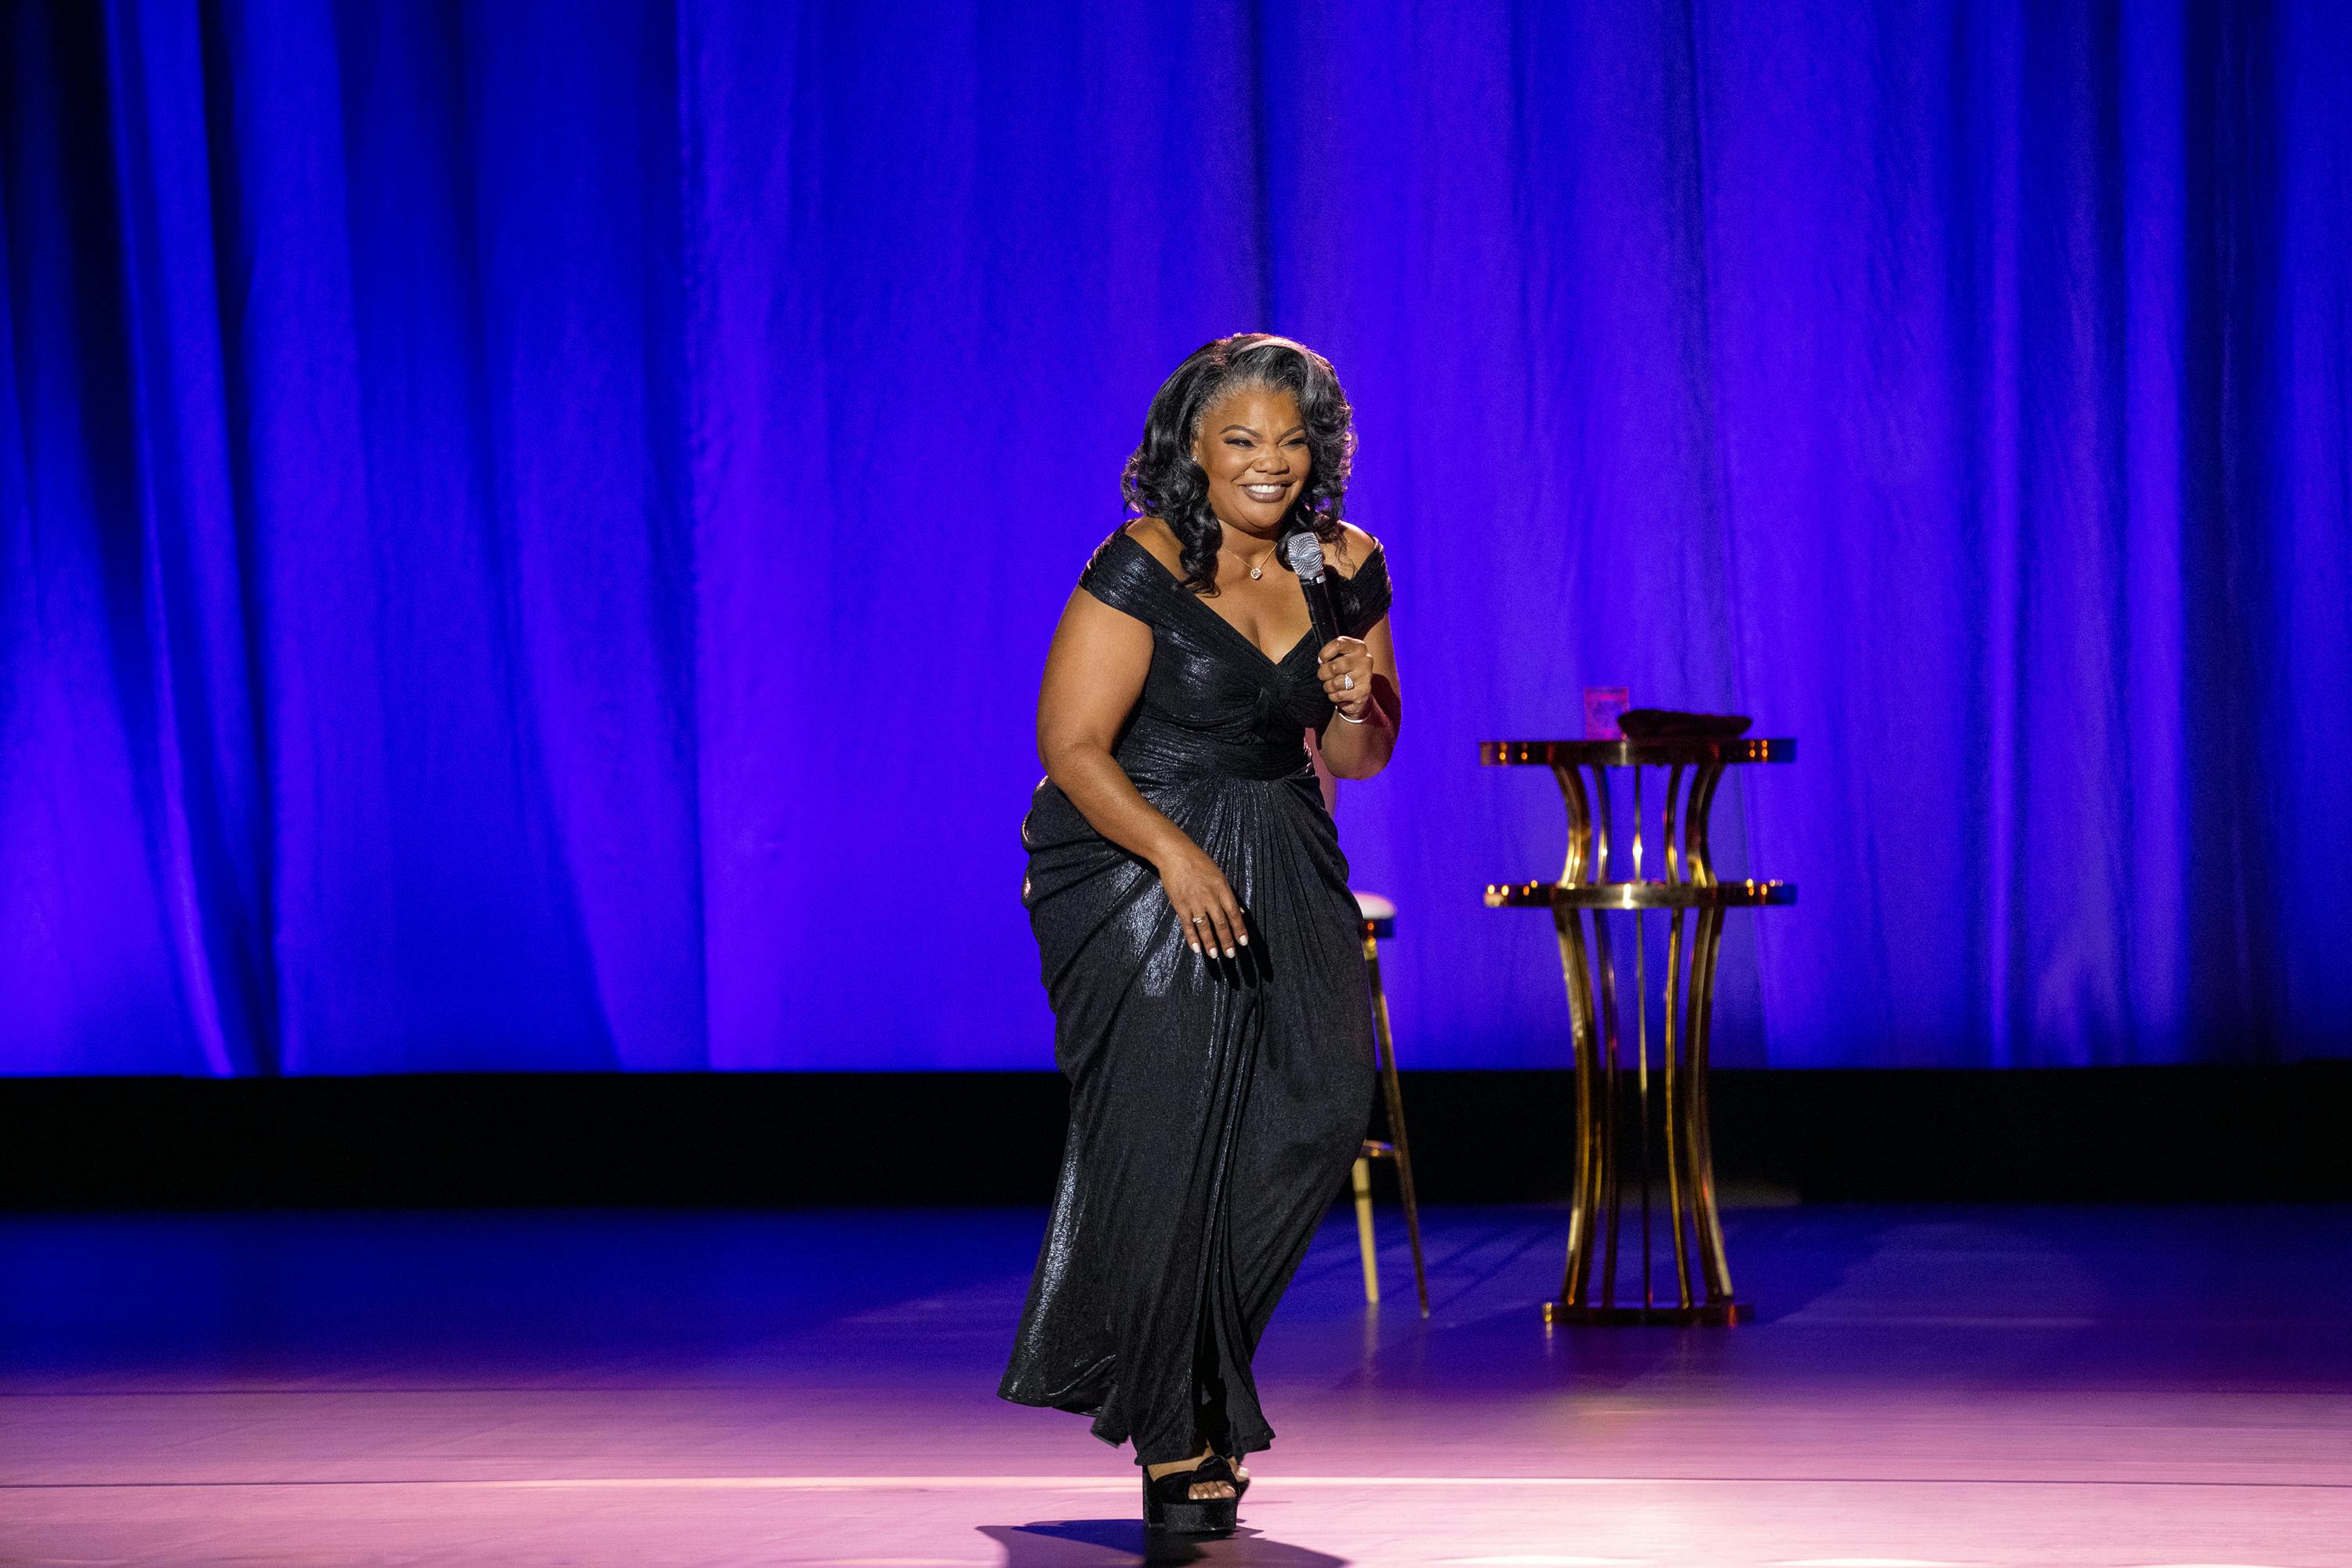 Mo’Nique wears a long black dress and black heels as she moves across a stage laughing into a mic.